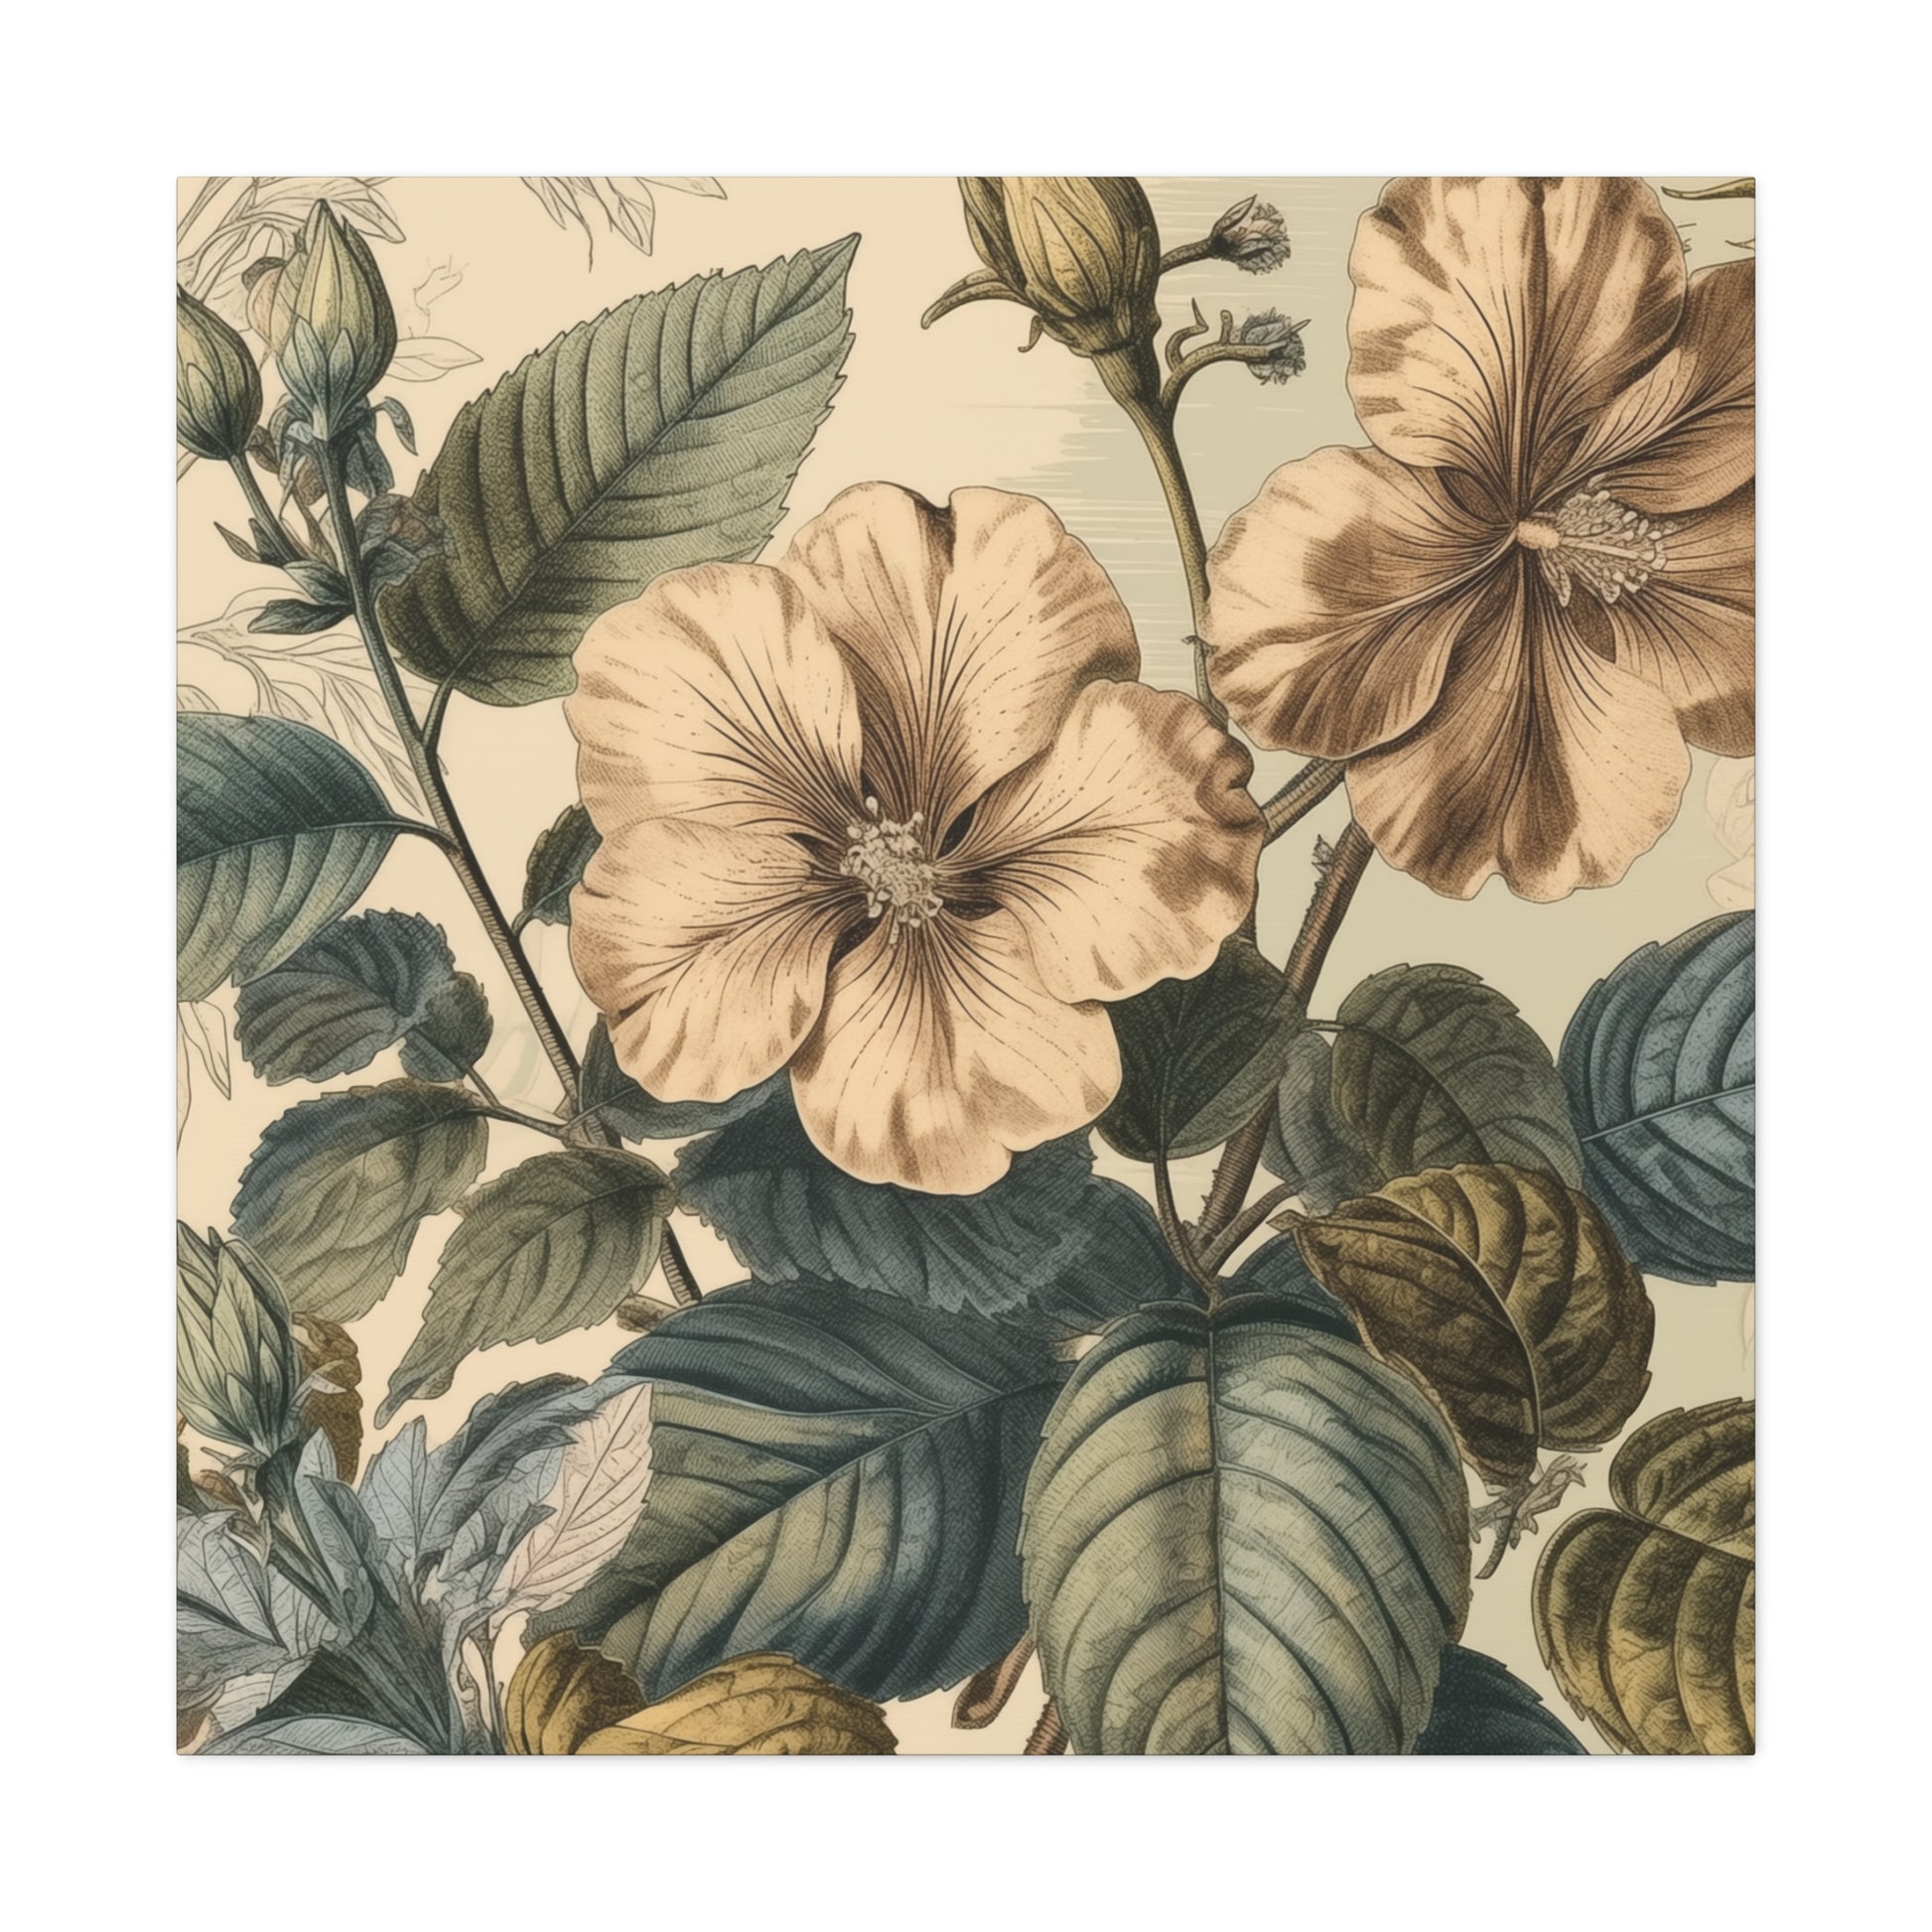 "Vintage Flower Illustrations" Wall Art - Weave Got Gifts - Unique Gifts You Won’t Find Anywhere Else!